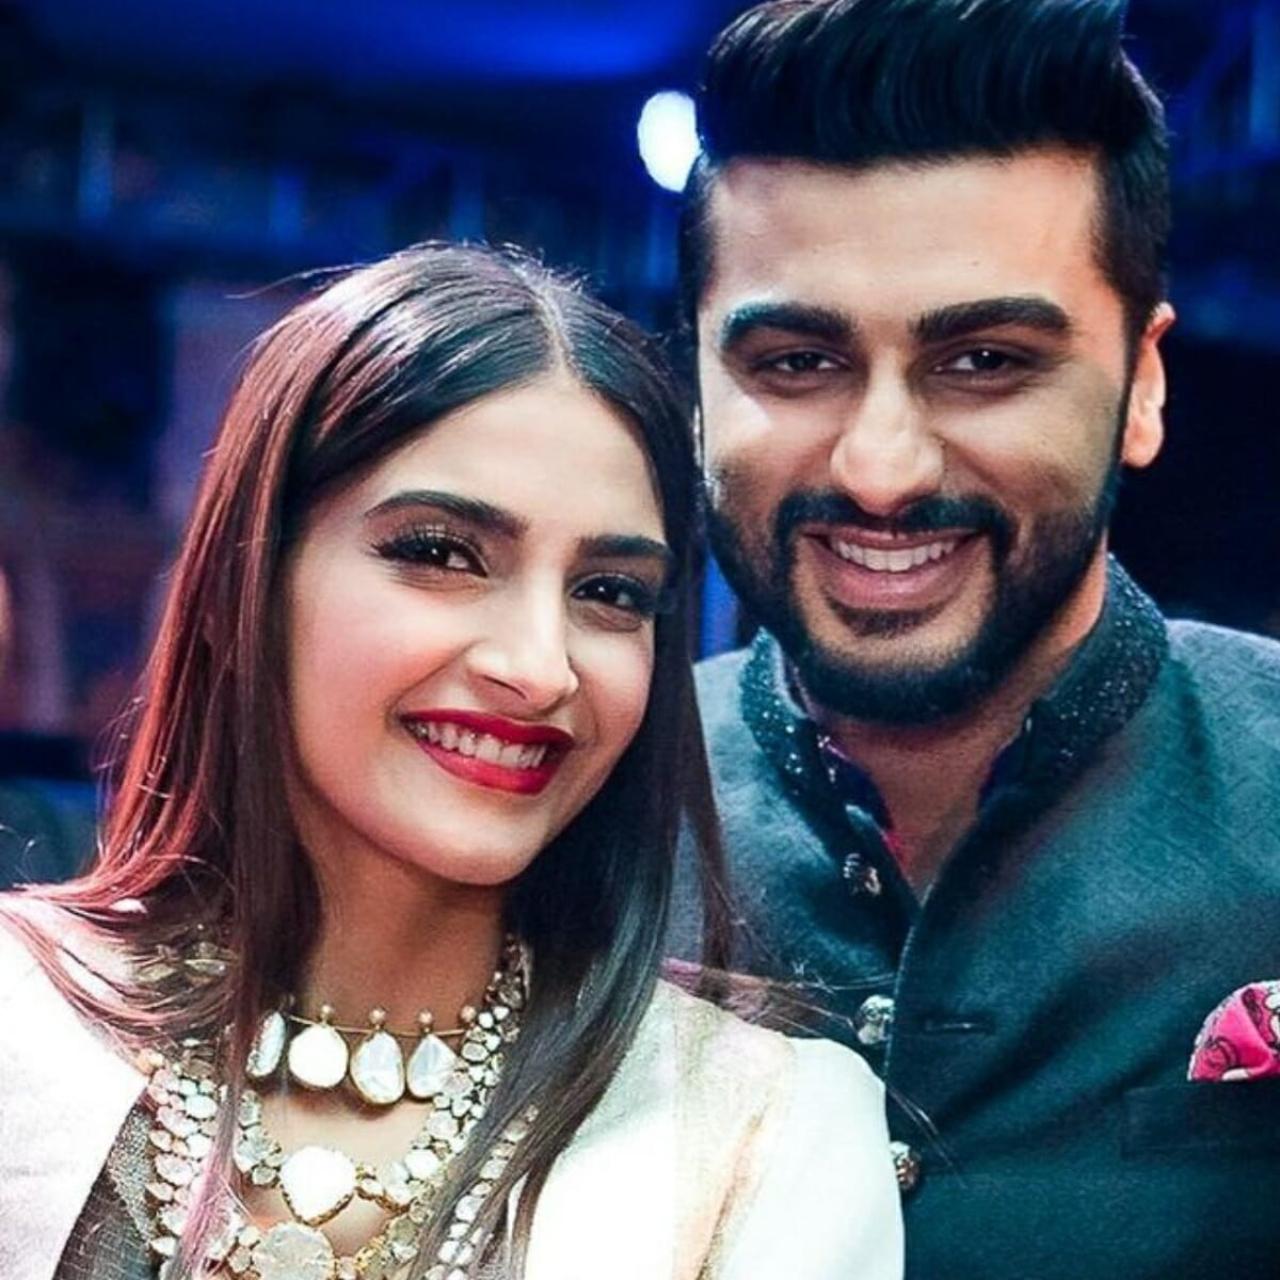 When Arjun revealed how he got suspended from school because of Sonam
Arjun talked about an incident that left him with a black eye as he went ahead and took on a fight for Sonam. During the show, Sonam spoke about an incident, when she was asked to leave the basketball court in school by a 'bully' and she inadvertently turned to Arjun for recourse. Opening up about how he went ahead to fight for her taking inspiration from Shah Rukh's character in Josh, Arjun said, 